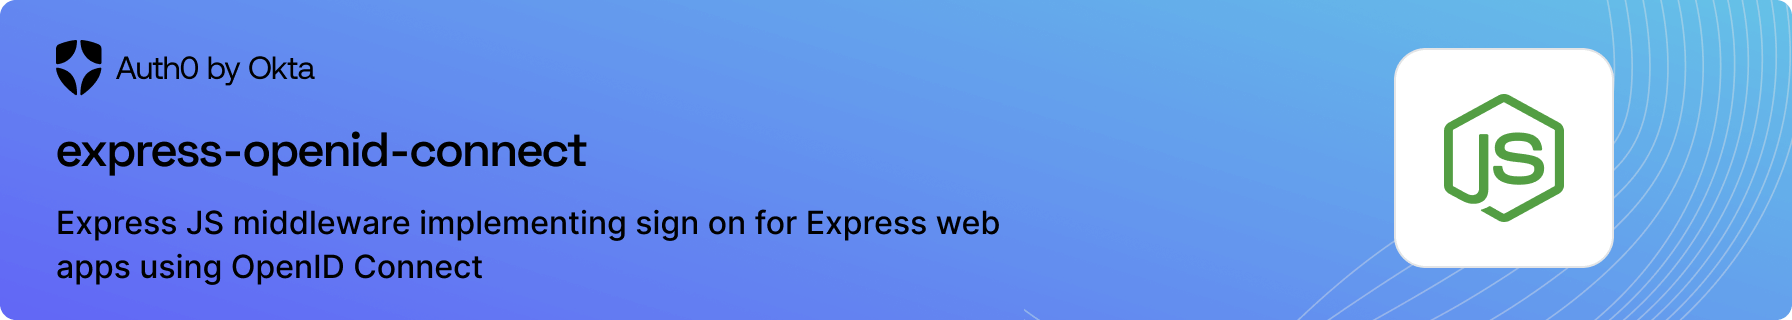 Express JS middleware implementing sign on for Express web apps using OpenID Connect.